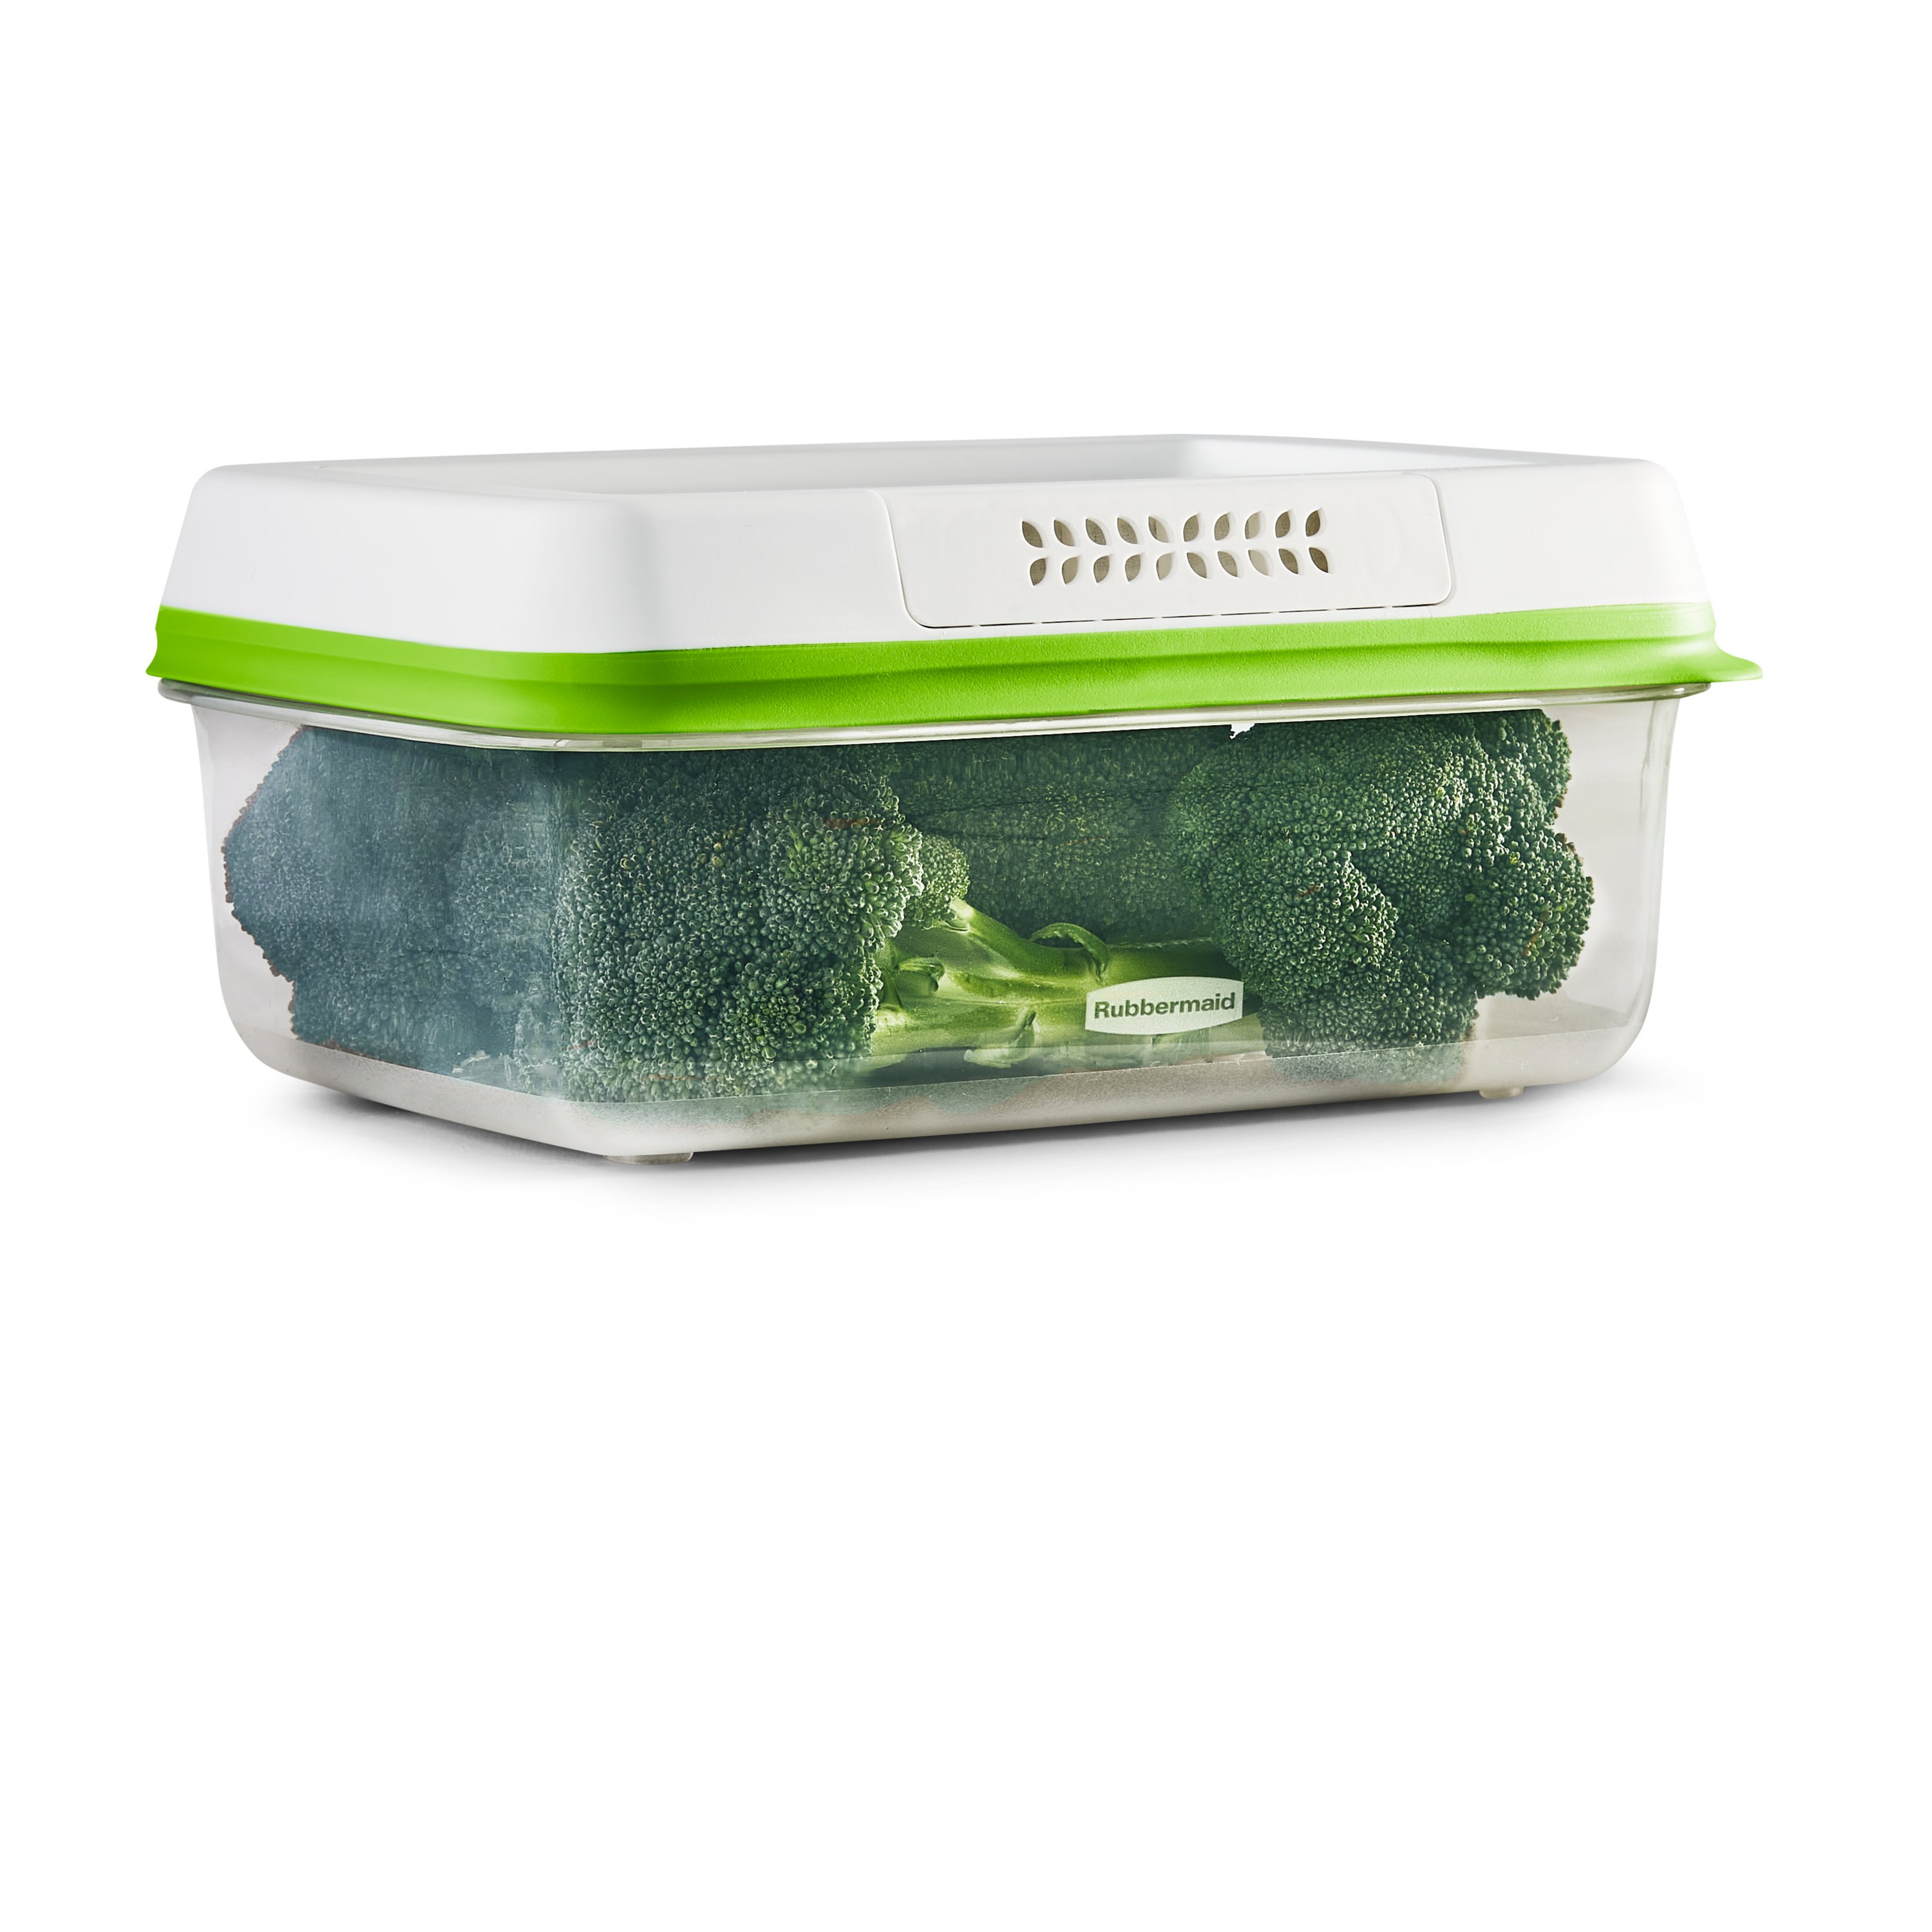 https://s7d9.scene7.com/is/image/NewellRubbermaid/2114816-rubbermaid-food-storage-green-11.3c-large-short-with-food-angle